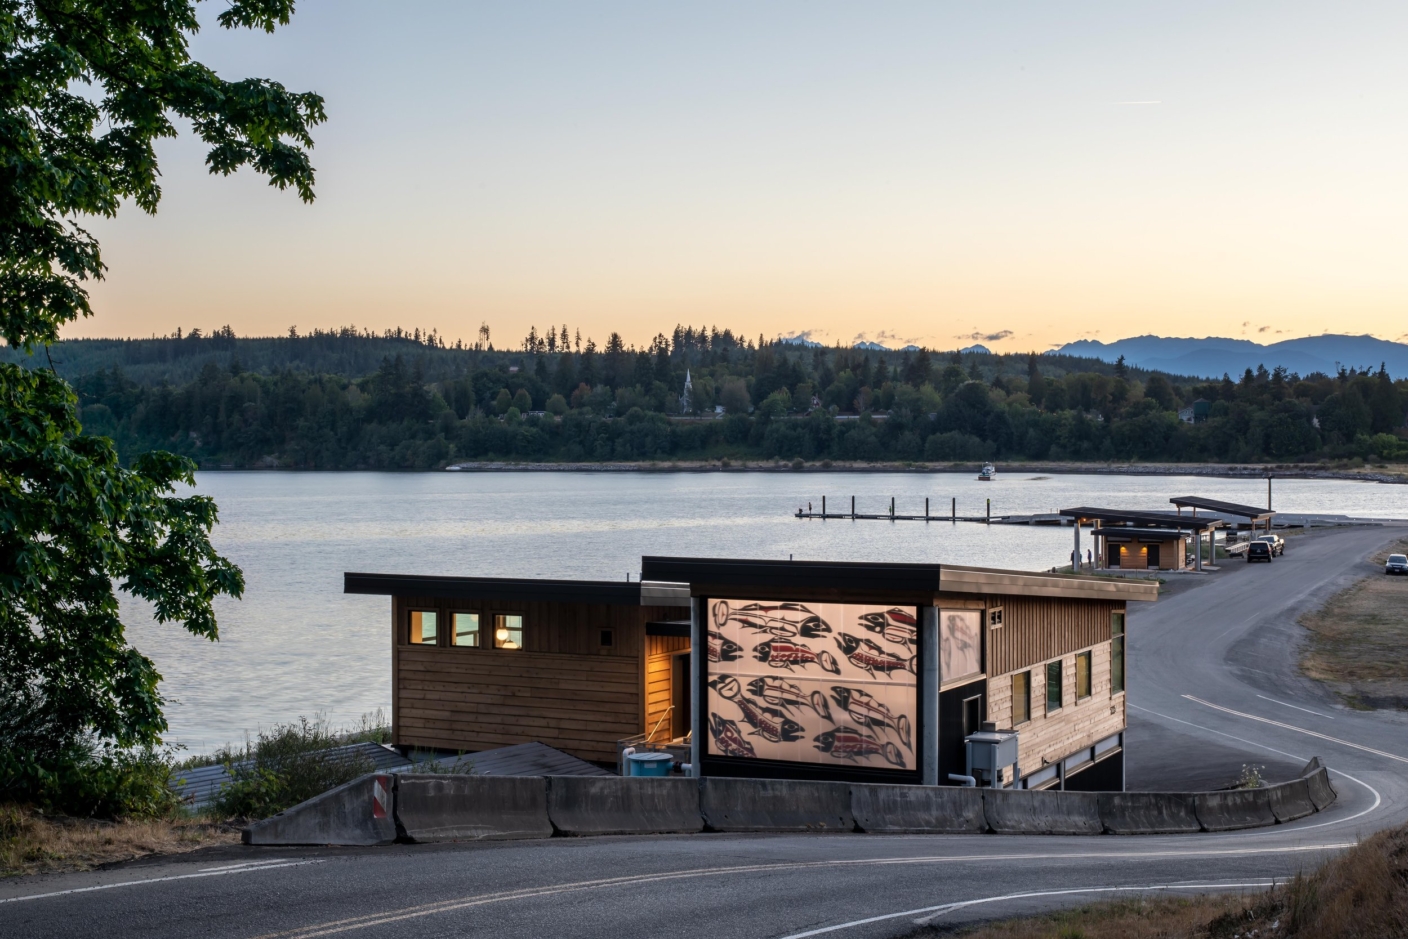 This month, we'll be hearing from CAST Architecture about the Port Gamble S'Klallam Tribe Hatchery and Beach Shelter. The meeting will be available either in-person at their Fremont office or via Zoom.